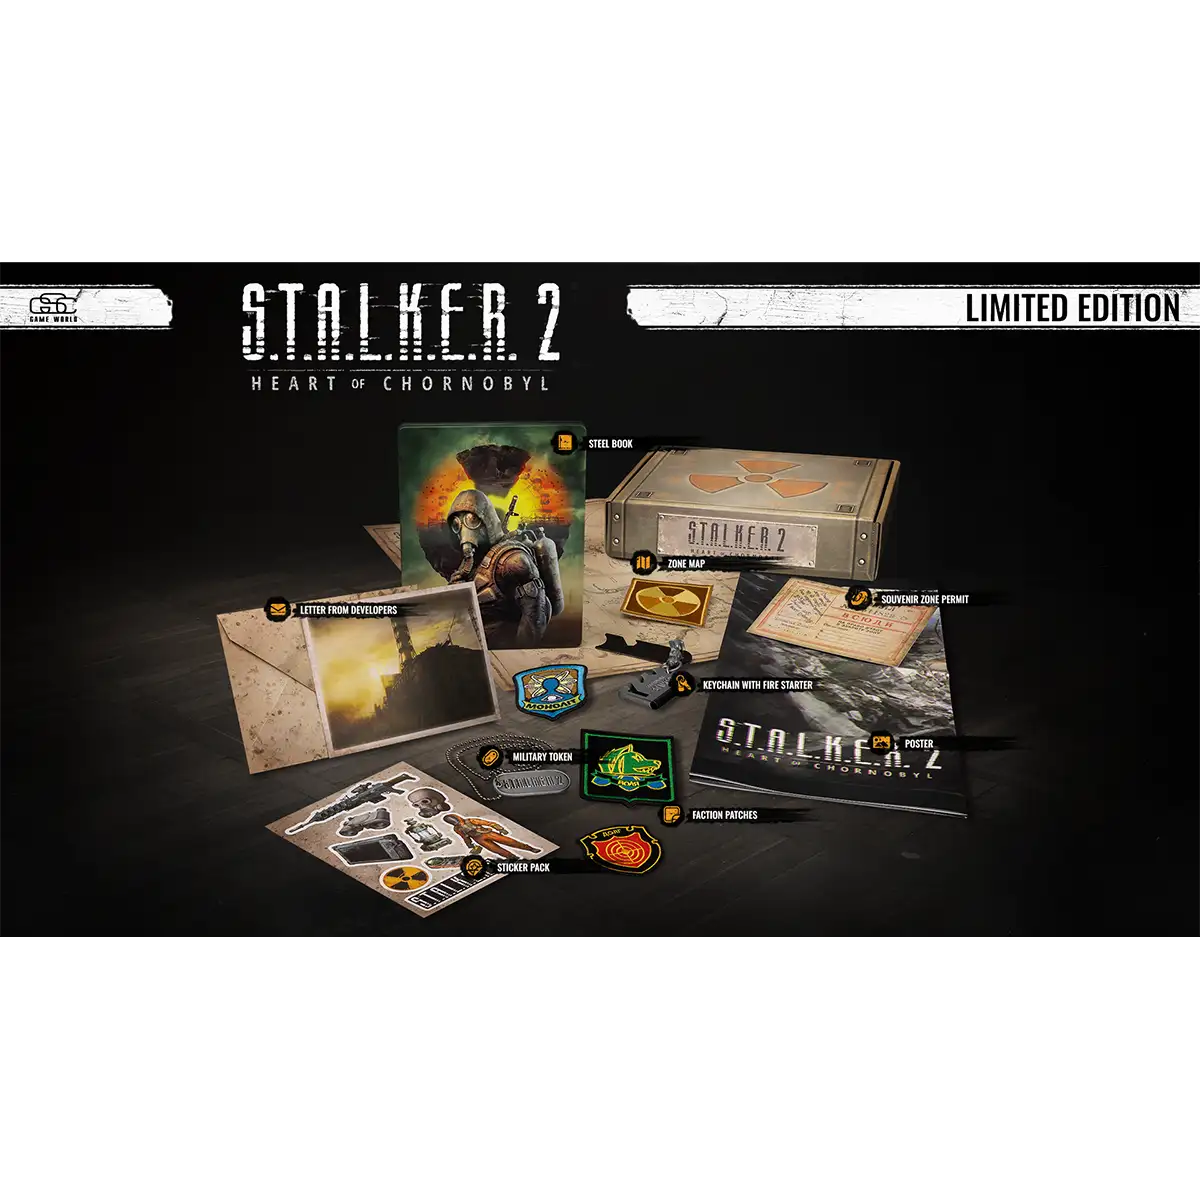 S.T.A.L.K.E.R. 2: Heart of Chornobyl Limited Edition (XSRX) Image 2